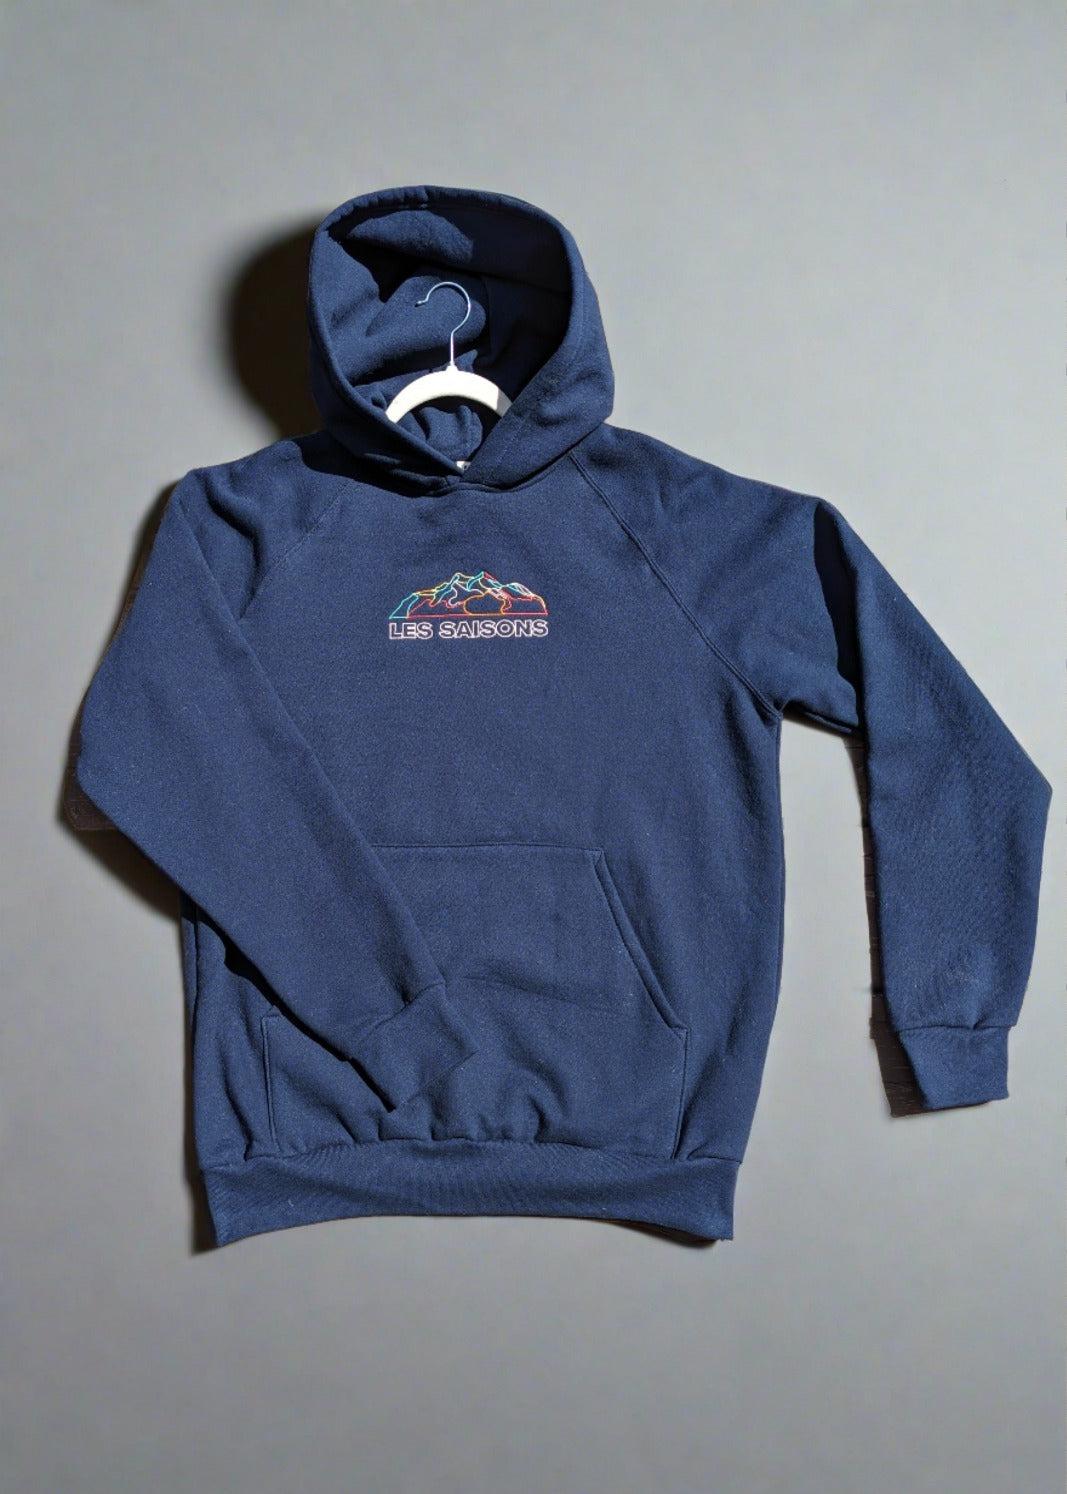 mountains lines les Saisons navy hoodie made in Canada